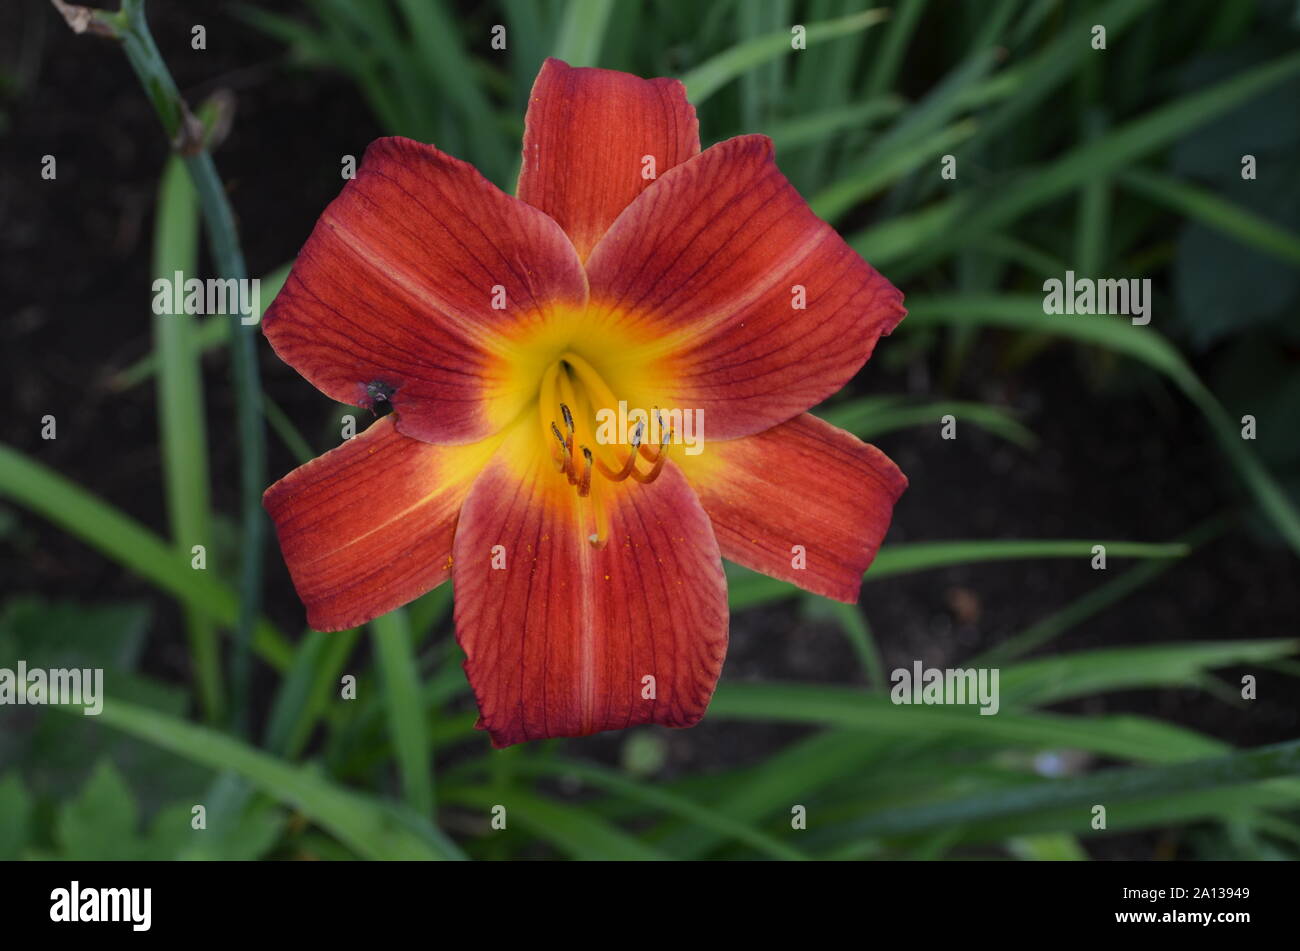 Sommer in Massachusetts: Close-up Rot Orange Daylily Blume in voller Blüte Stockfoto